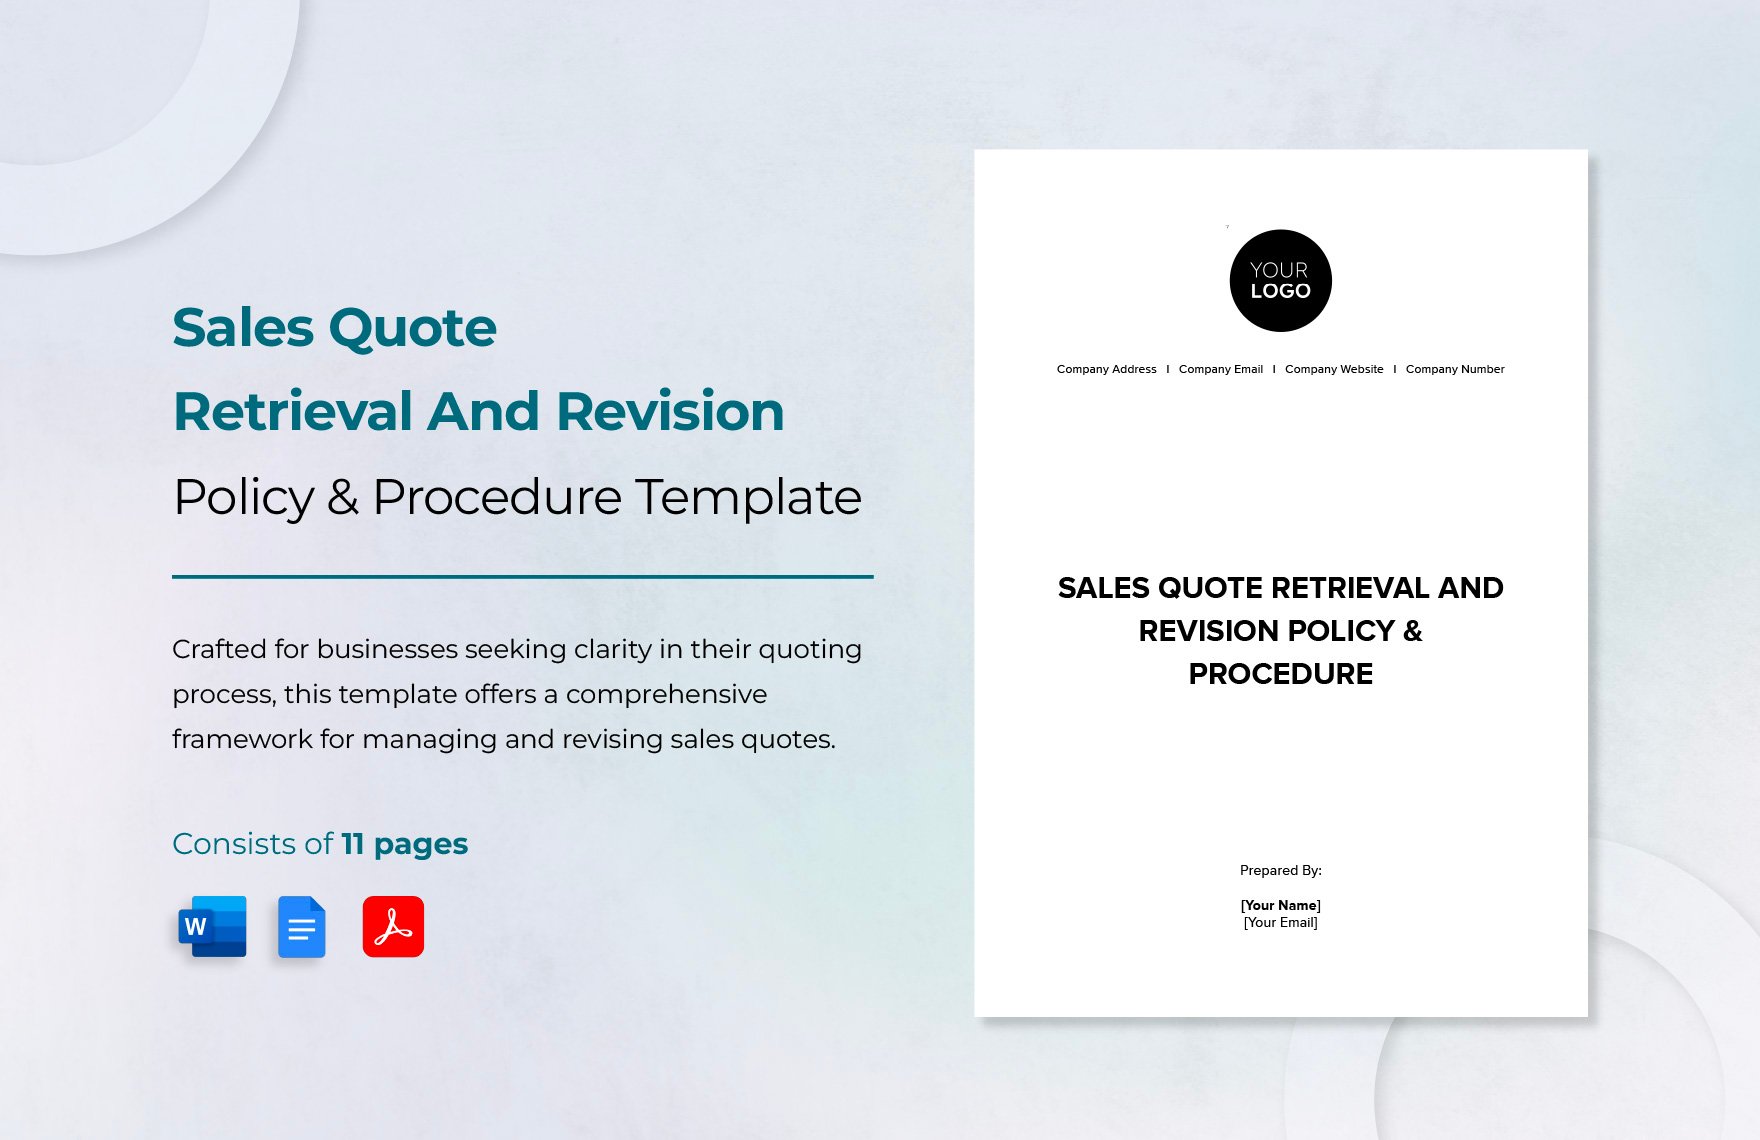 Sales Quote Retrieval and Revision Policy & Procedure Template